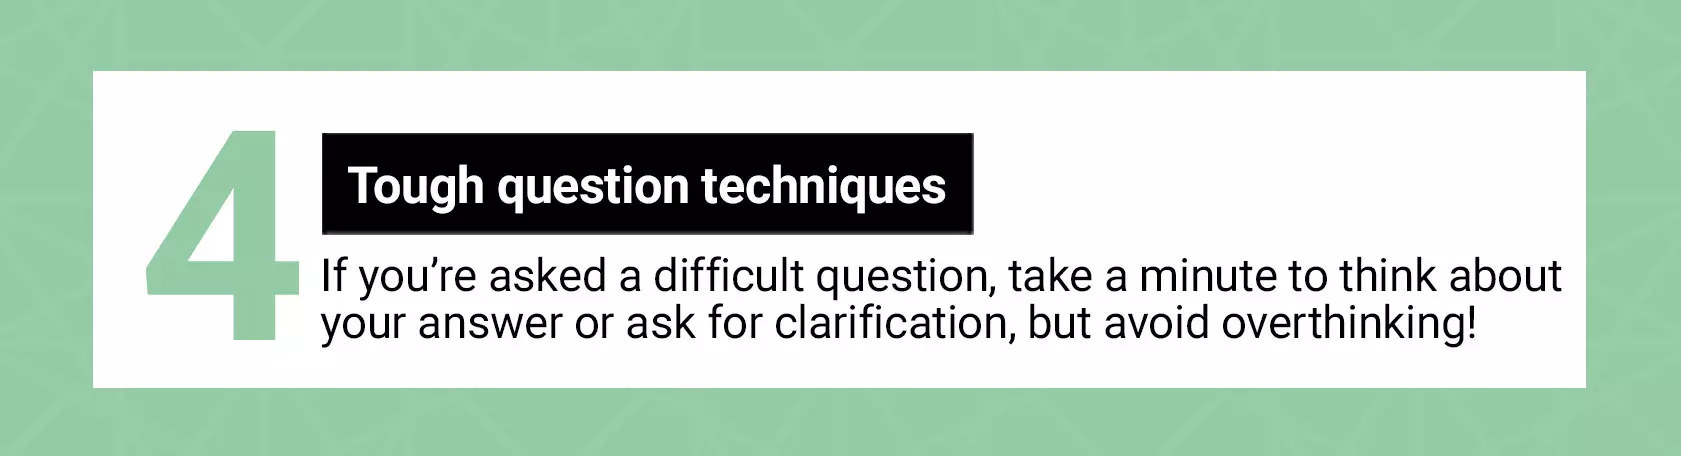 Tough question techniques. If you're asked a difficult question, take a minute to think about your answer or ask for clarification, but avoid overthinking!